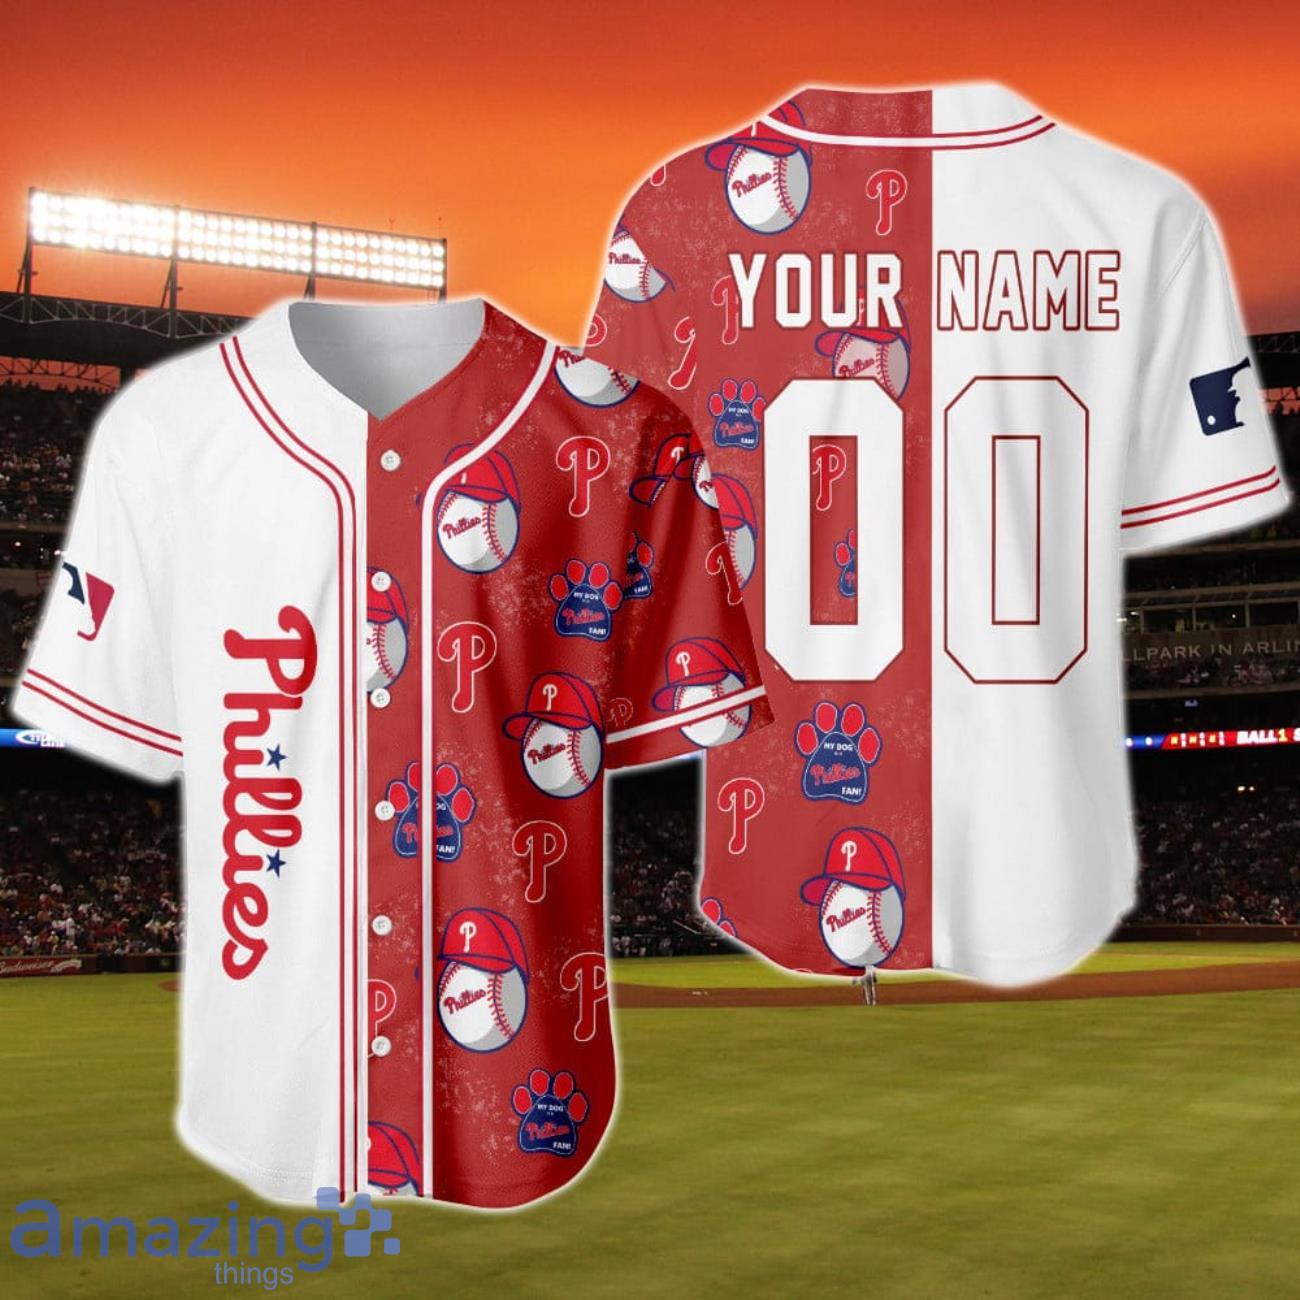 phillies jersey outfit